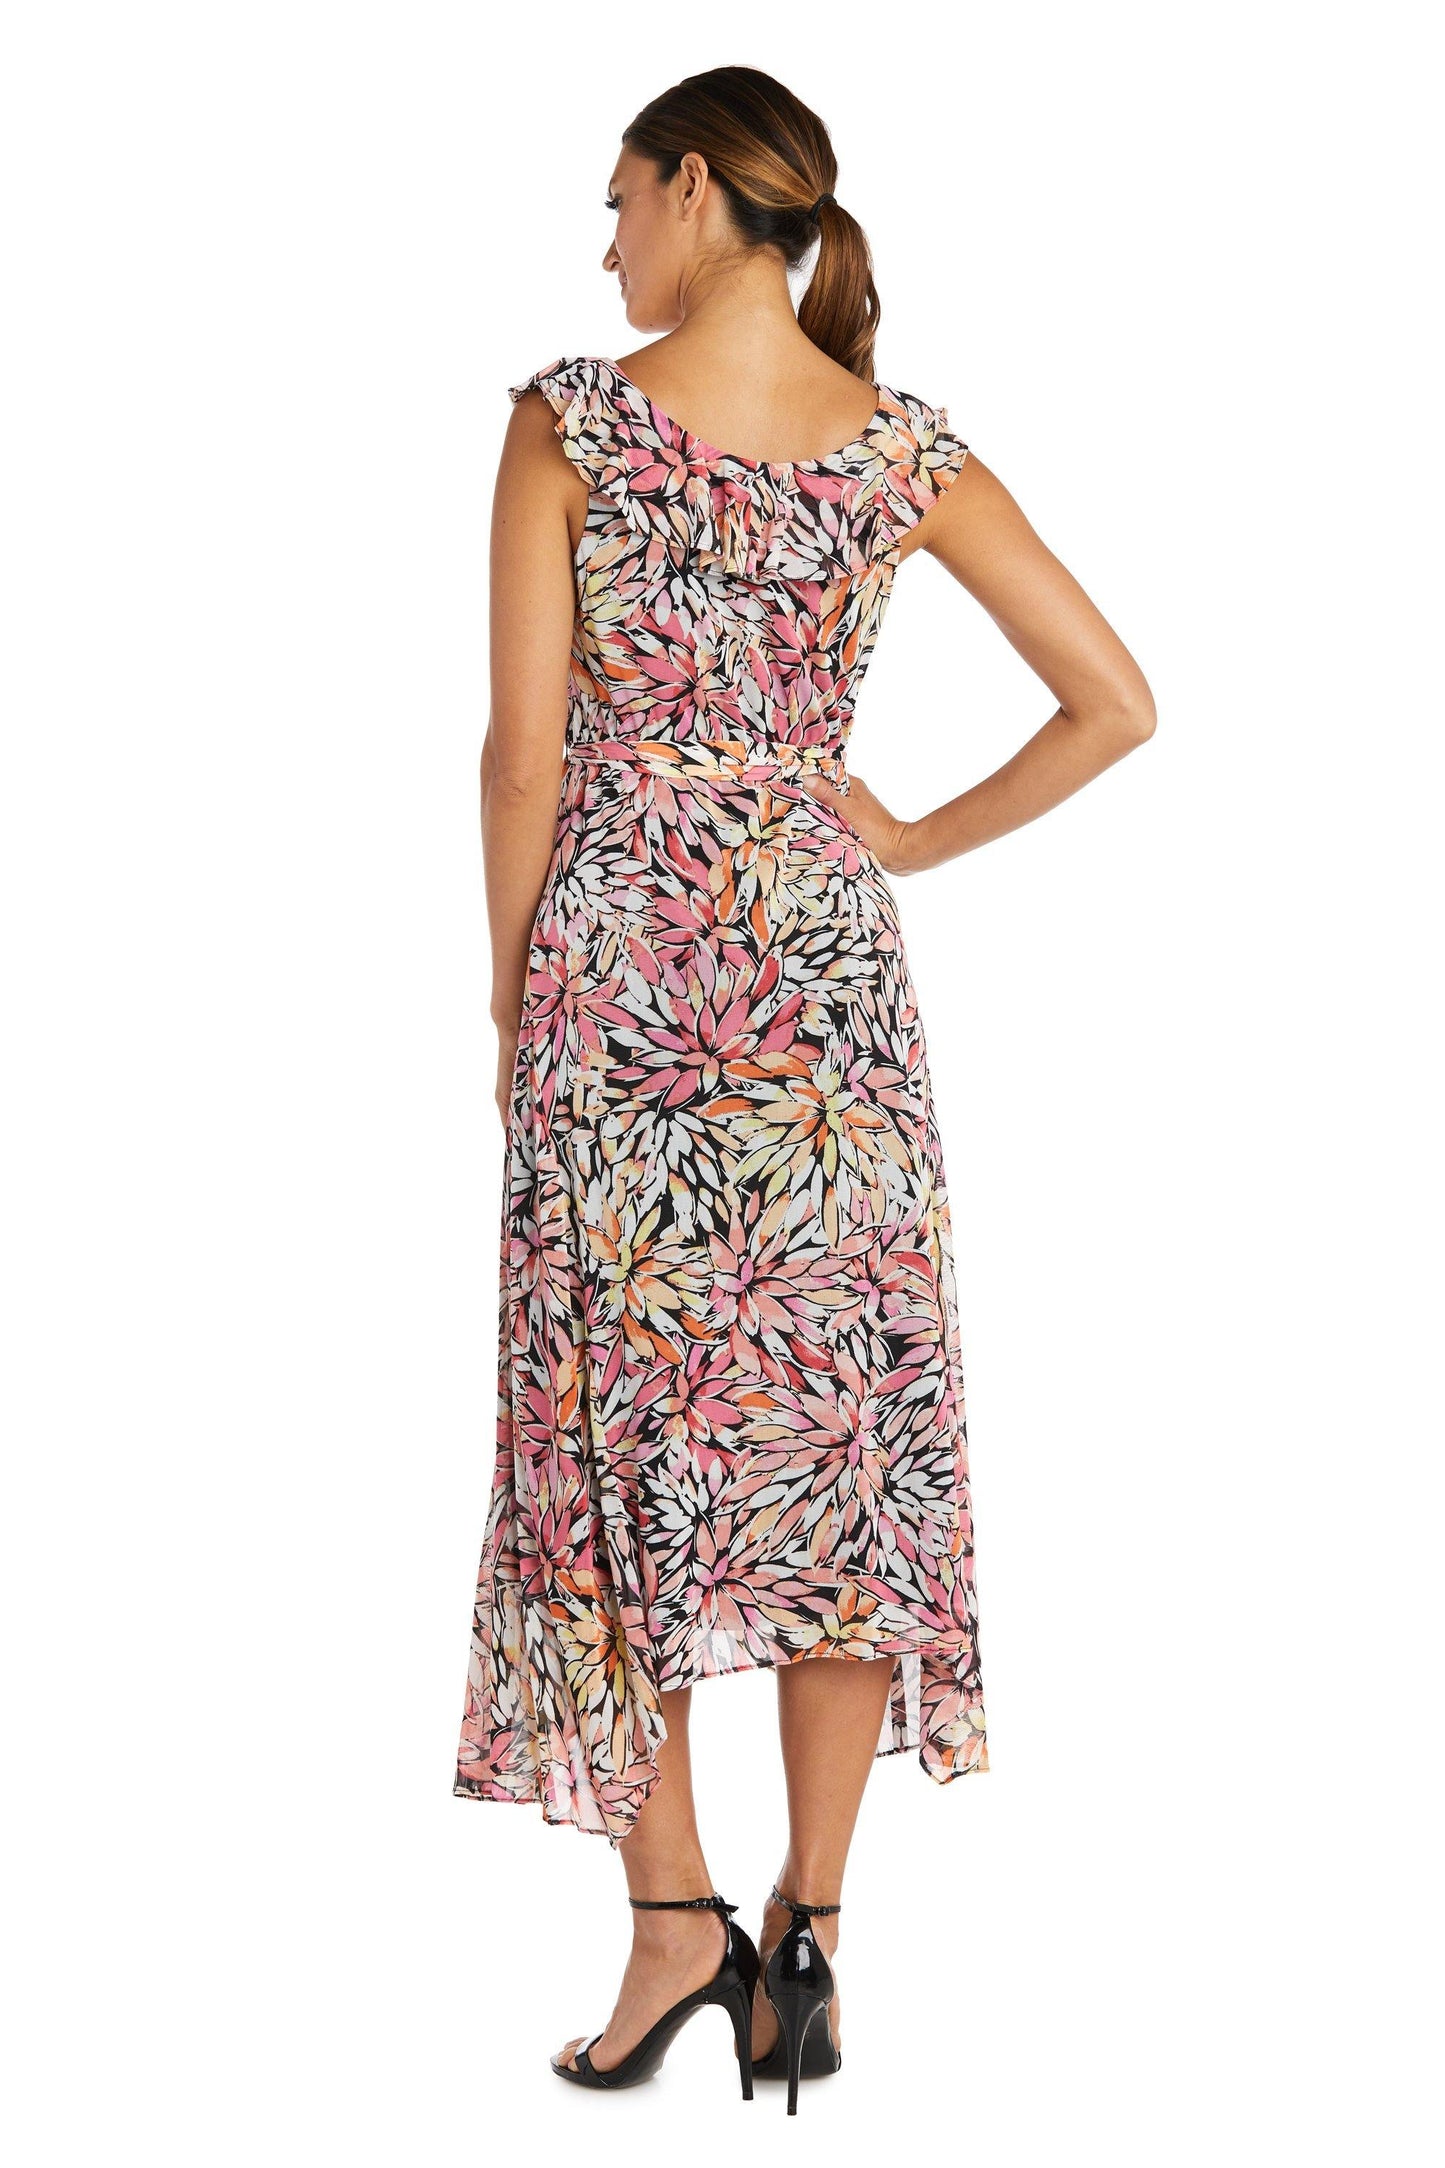 R&M Richards High Low Sleeveless Dress 7204 - The Dress Outlet